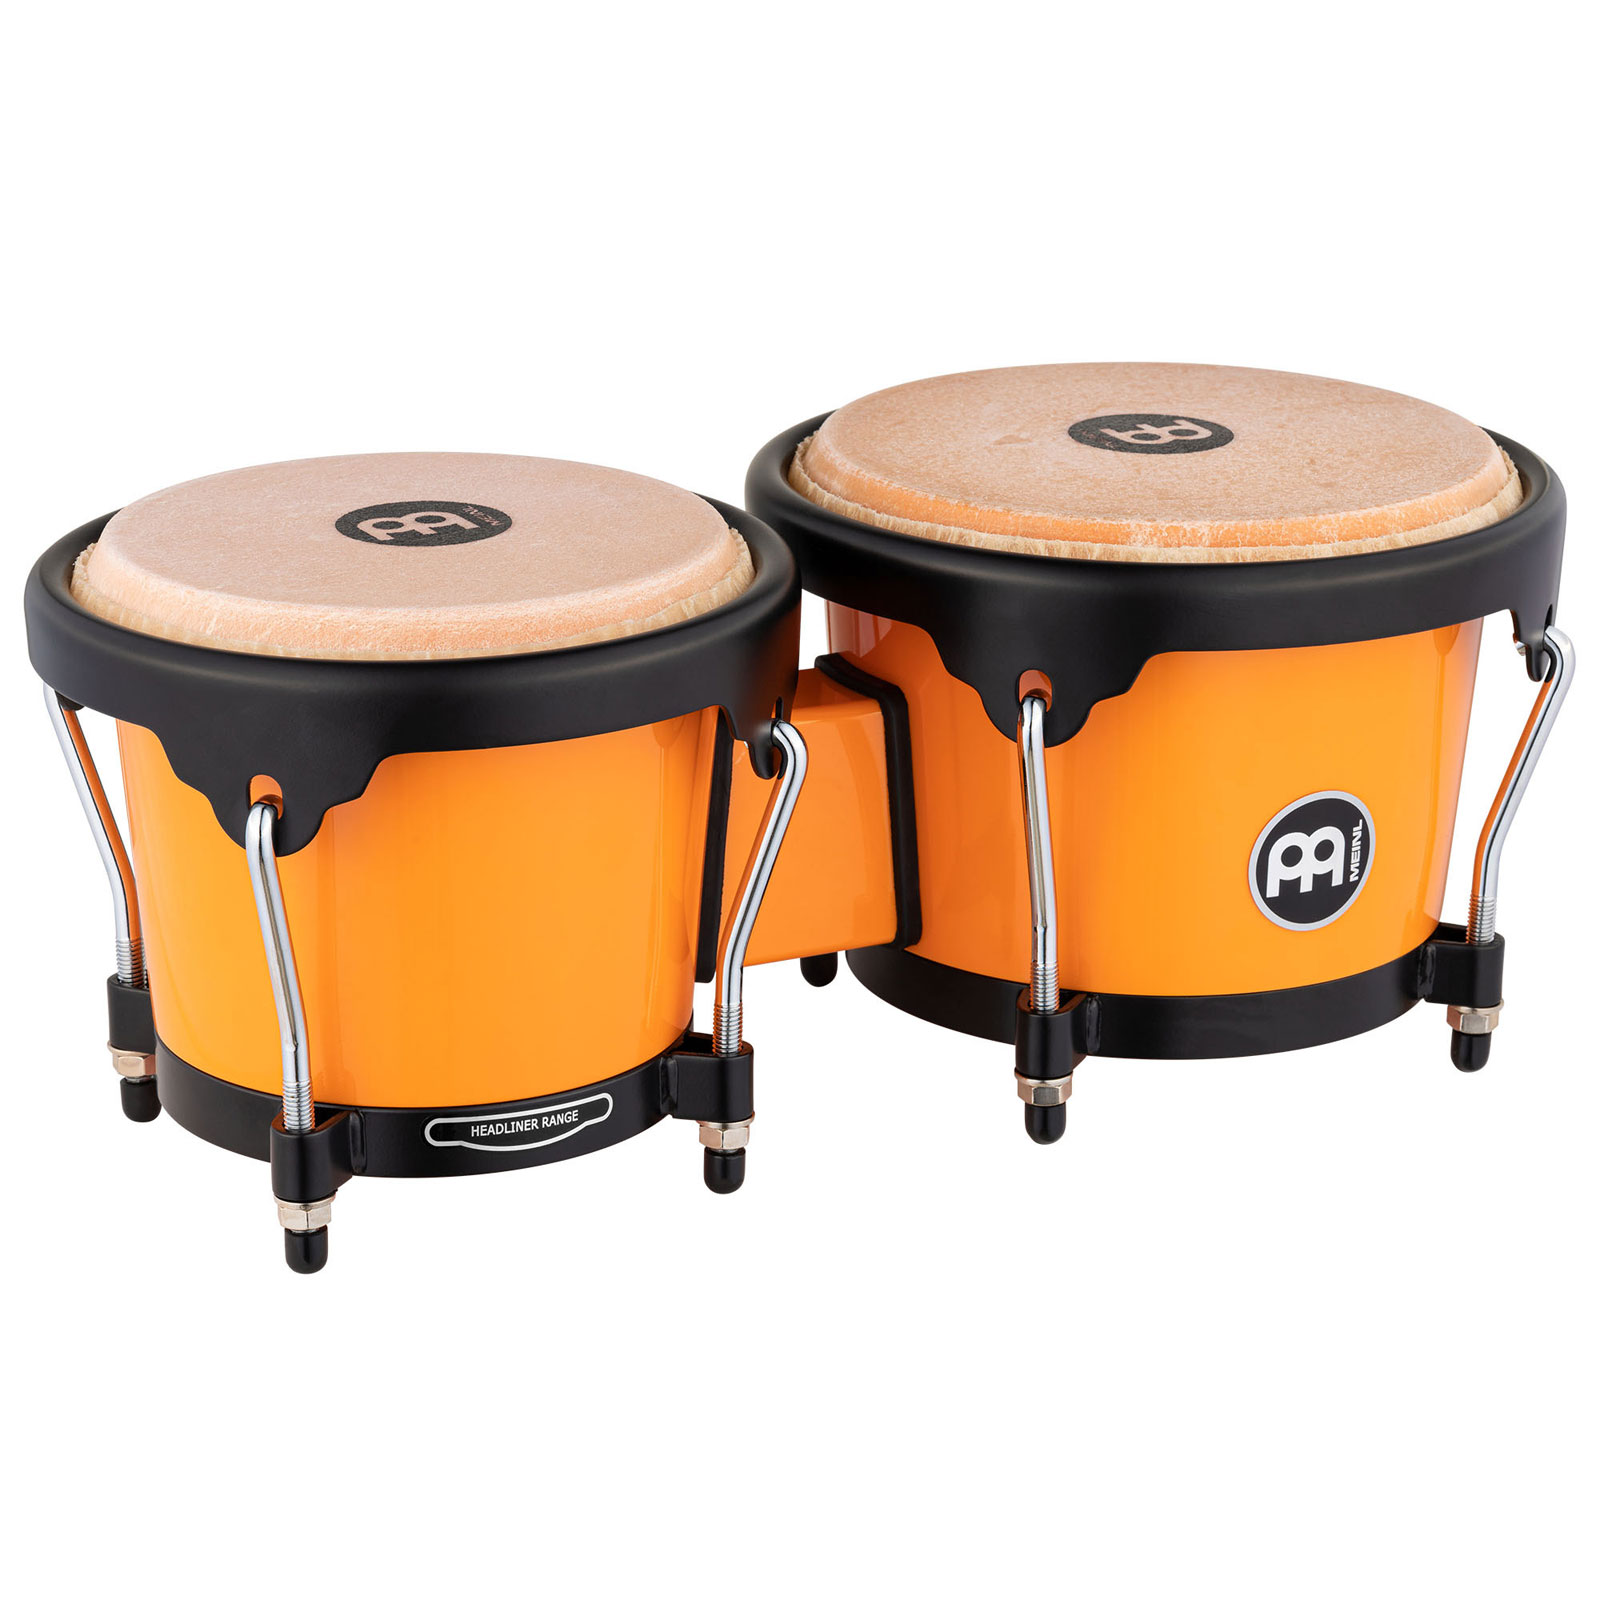 MEINL PERCUSSION JOURNEY SERIES HB50 BONGO, CREAMSICLE